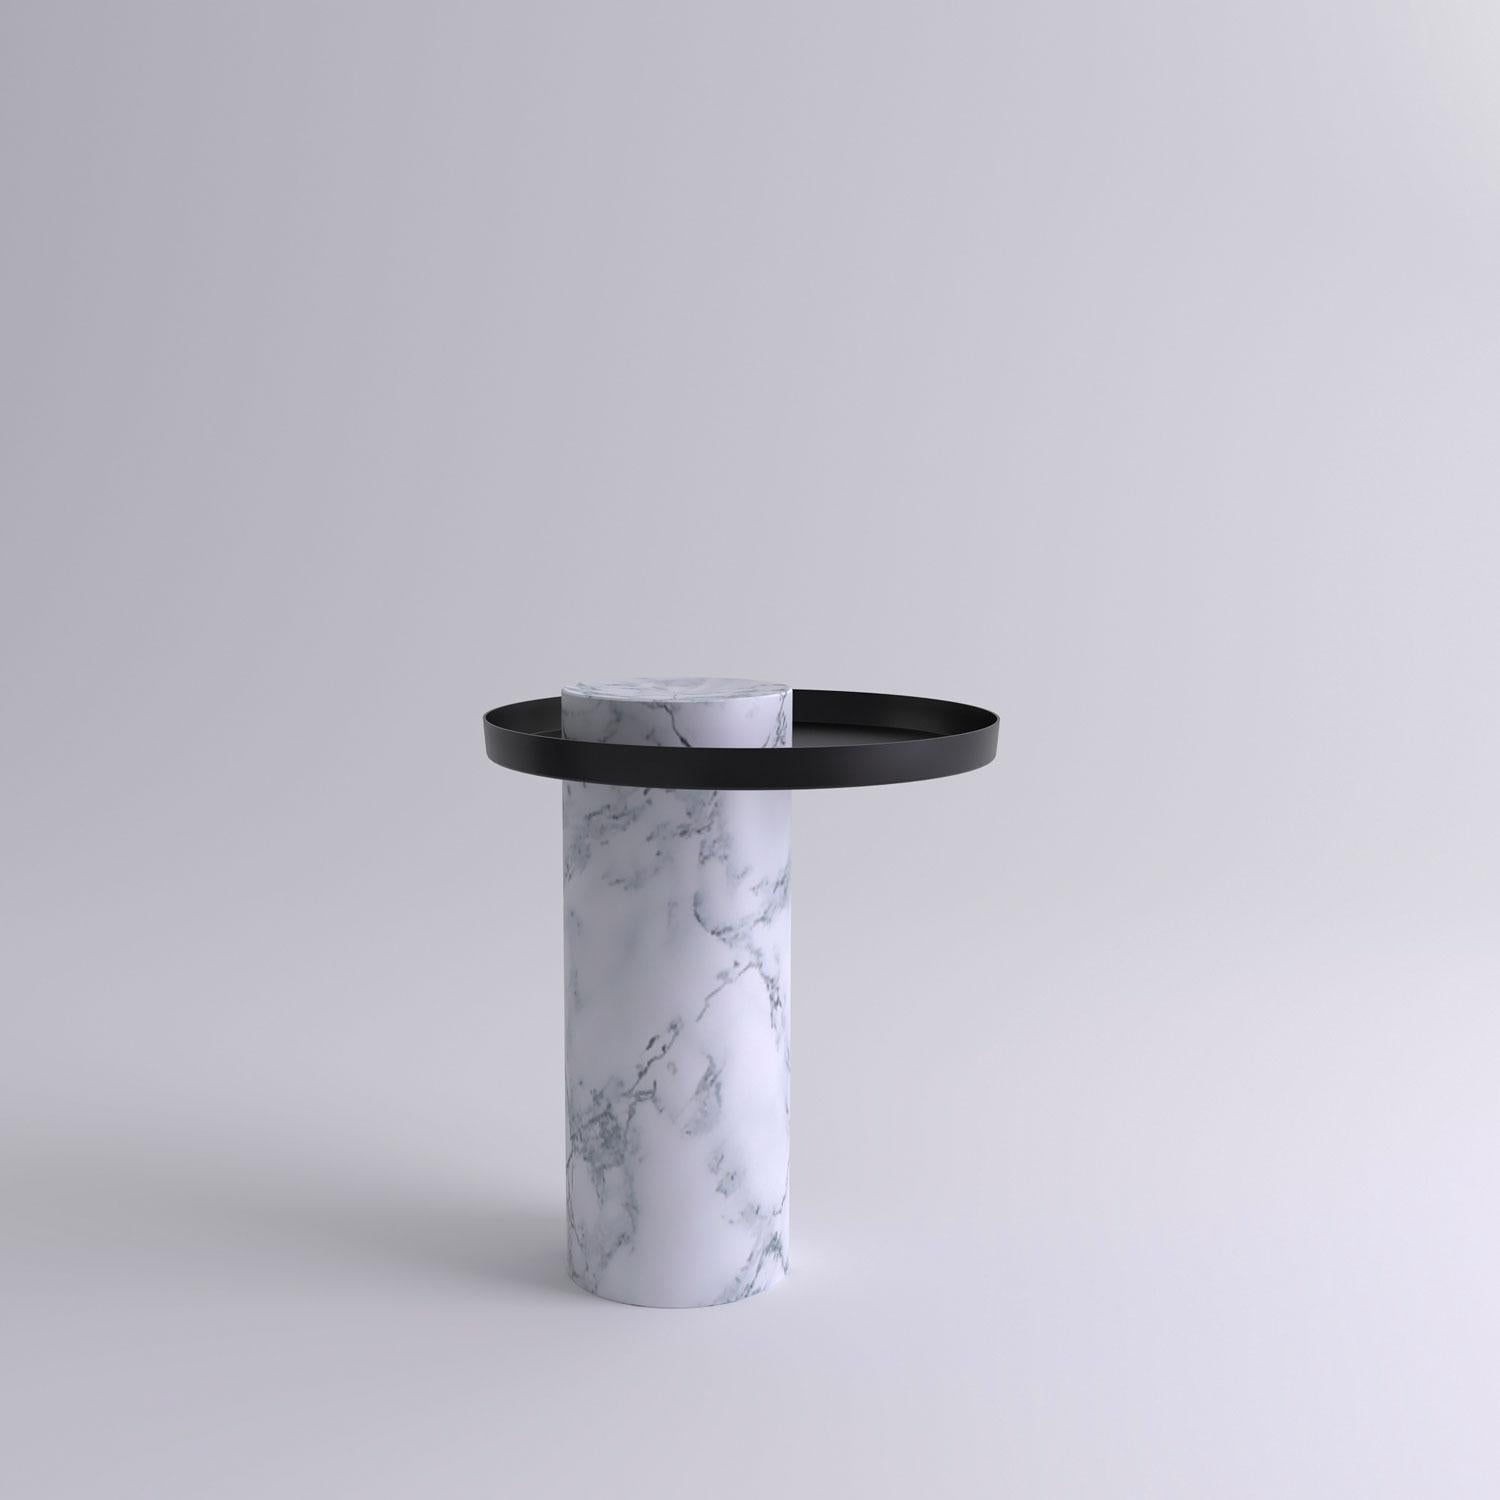 Medium white contemporary guéridon, Sebastian Herkner
Dimensions: D 40 x H 46 cm
Materials: Pele de Tigre marble, black metal tray

The salute table exists in 3 sizes, 4 different marble stones for the column and 5 different finishes for the